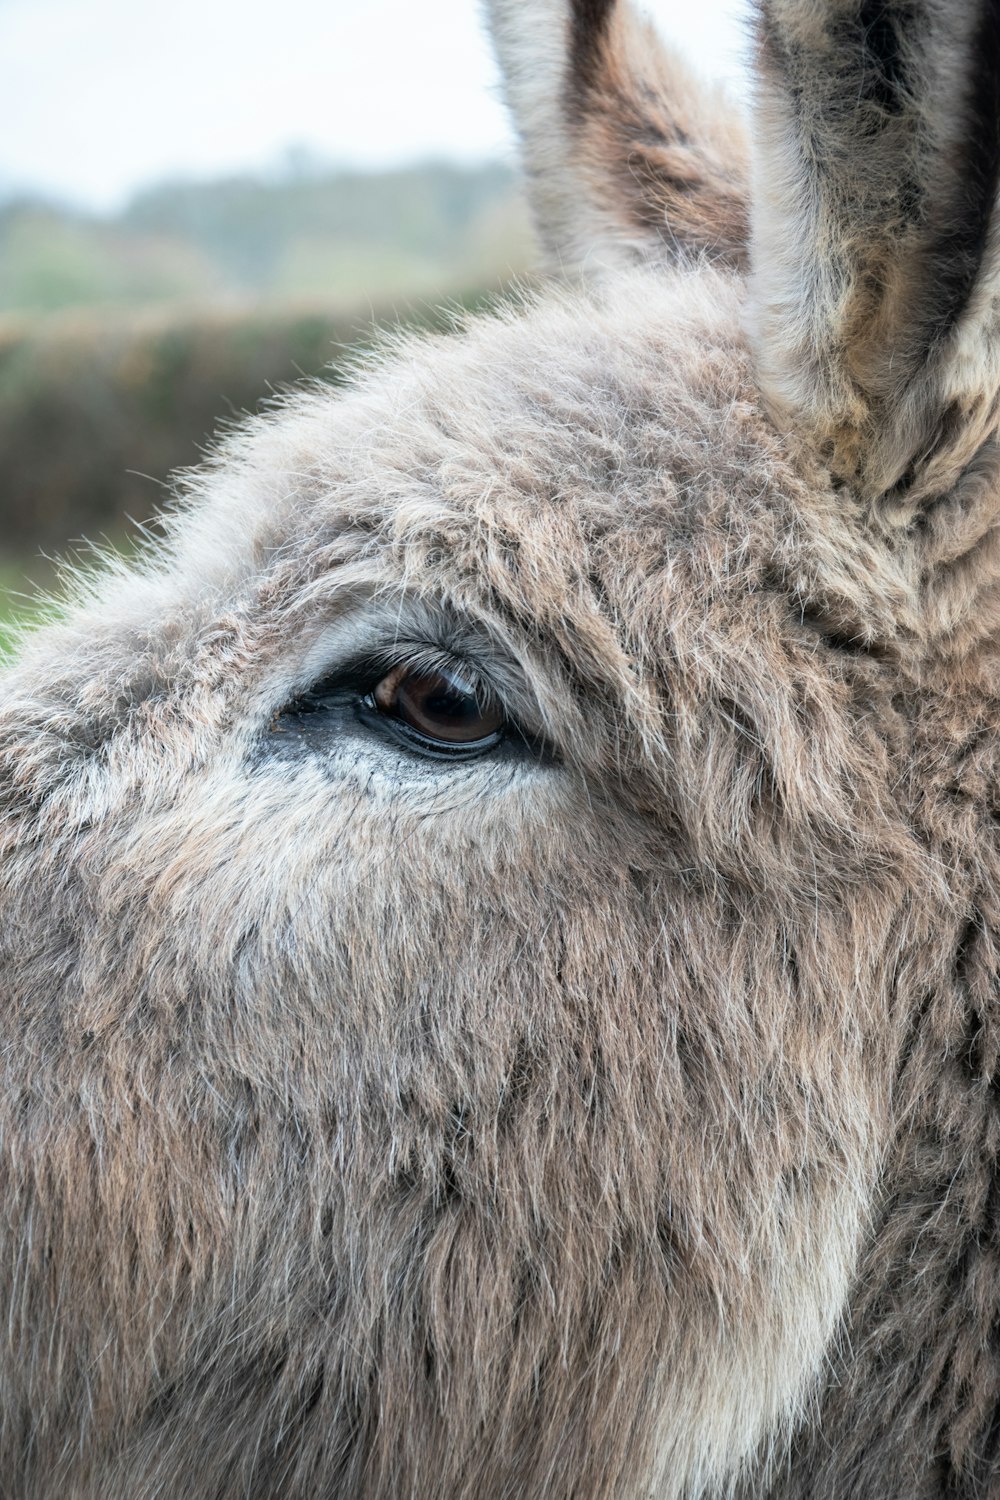 a close up of a donkey with a blurry background